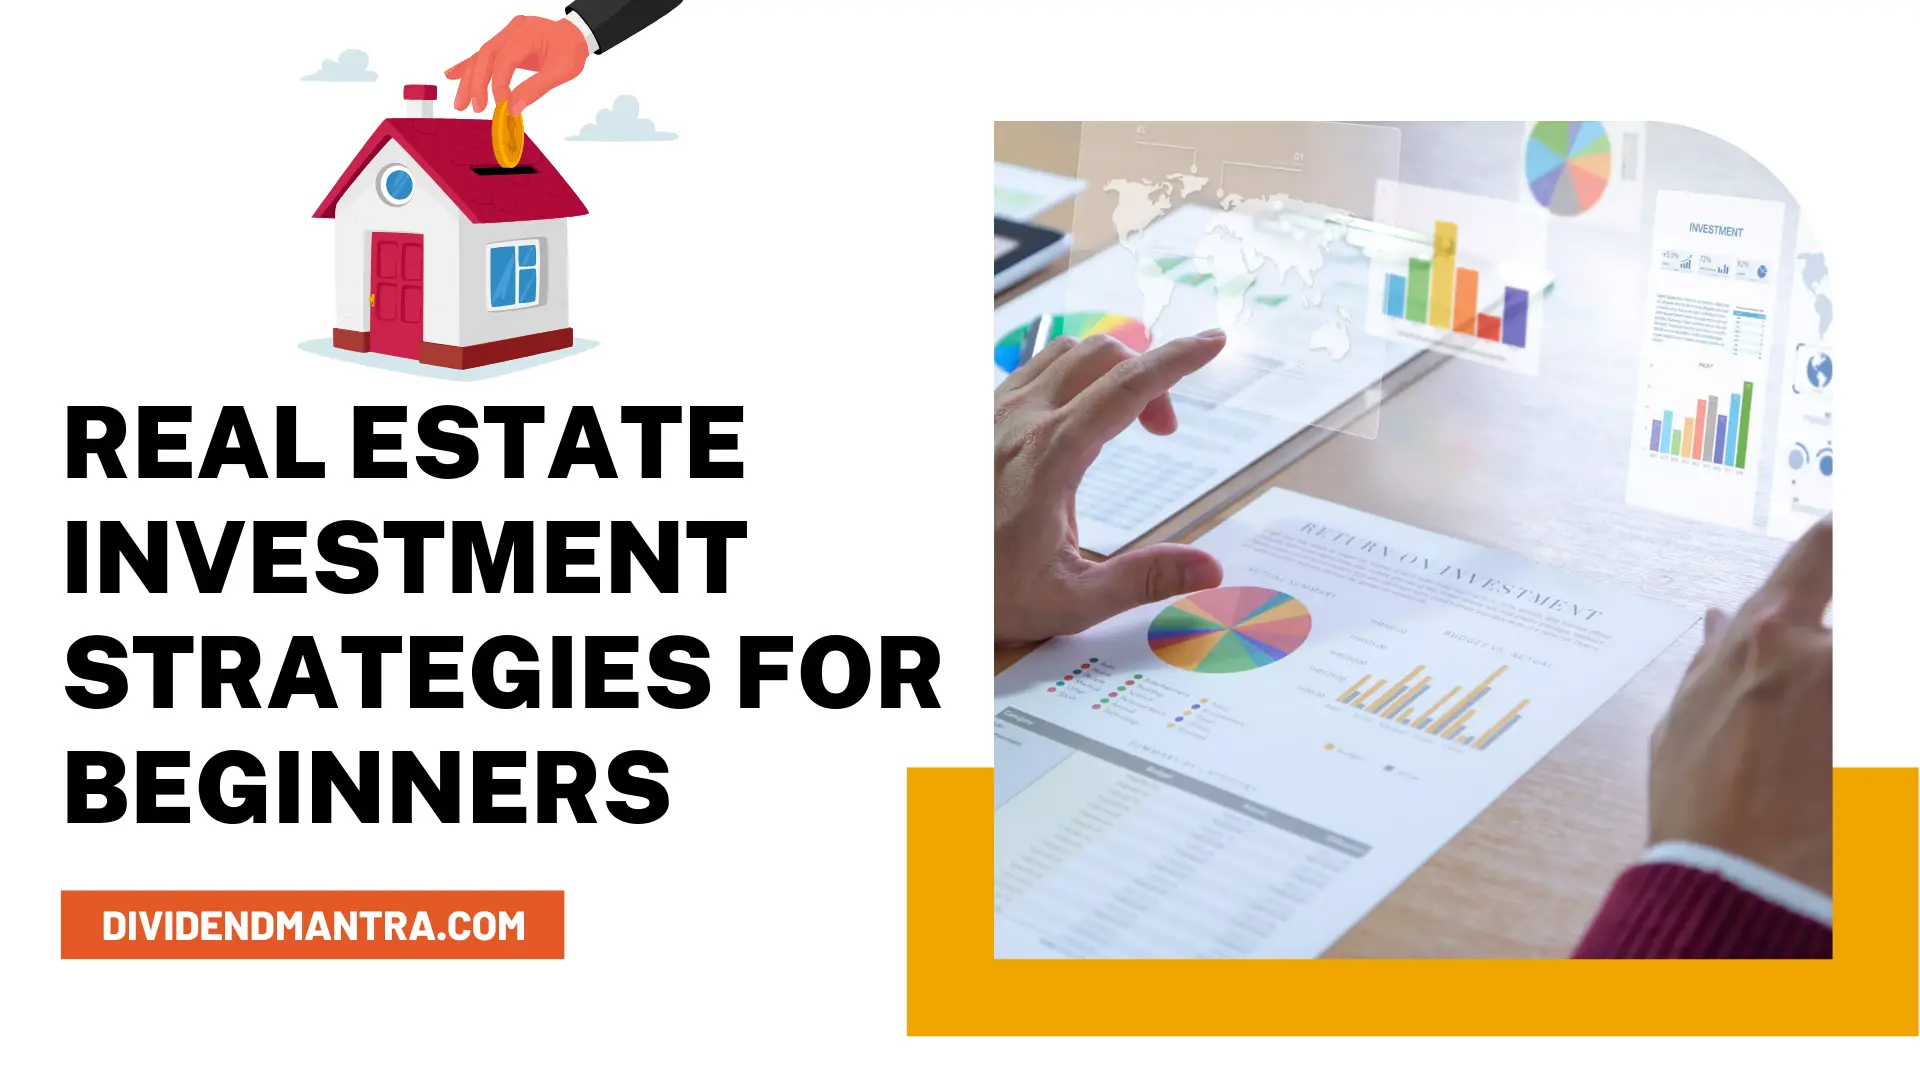 Real Estate Investment Strategies for Beginners